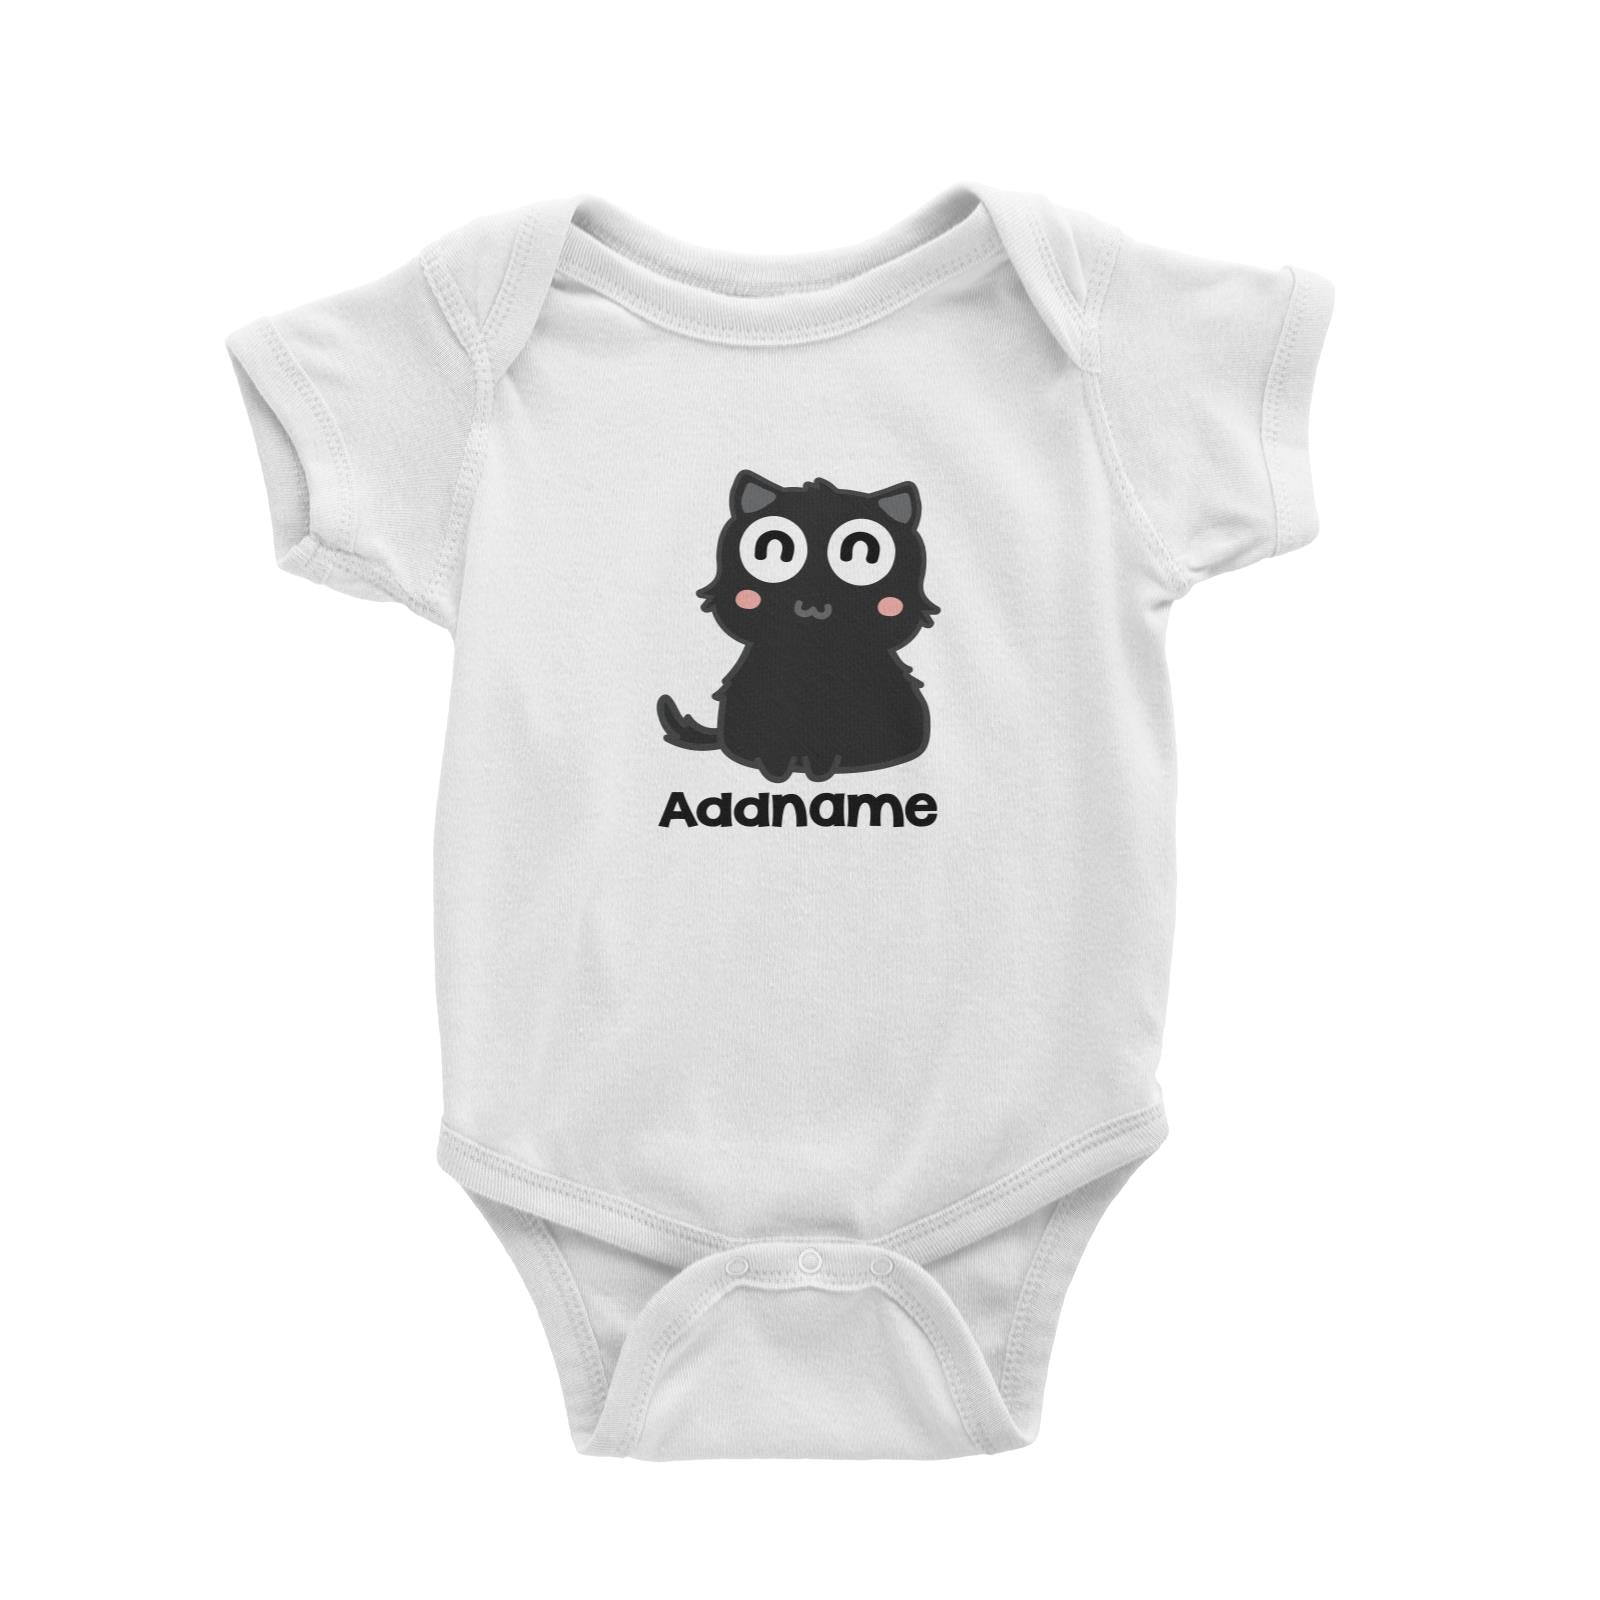 Drawn Adorable Cats Black Addname Baby Romper